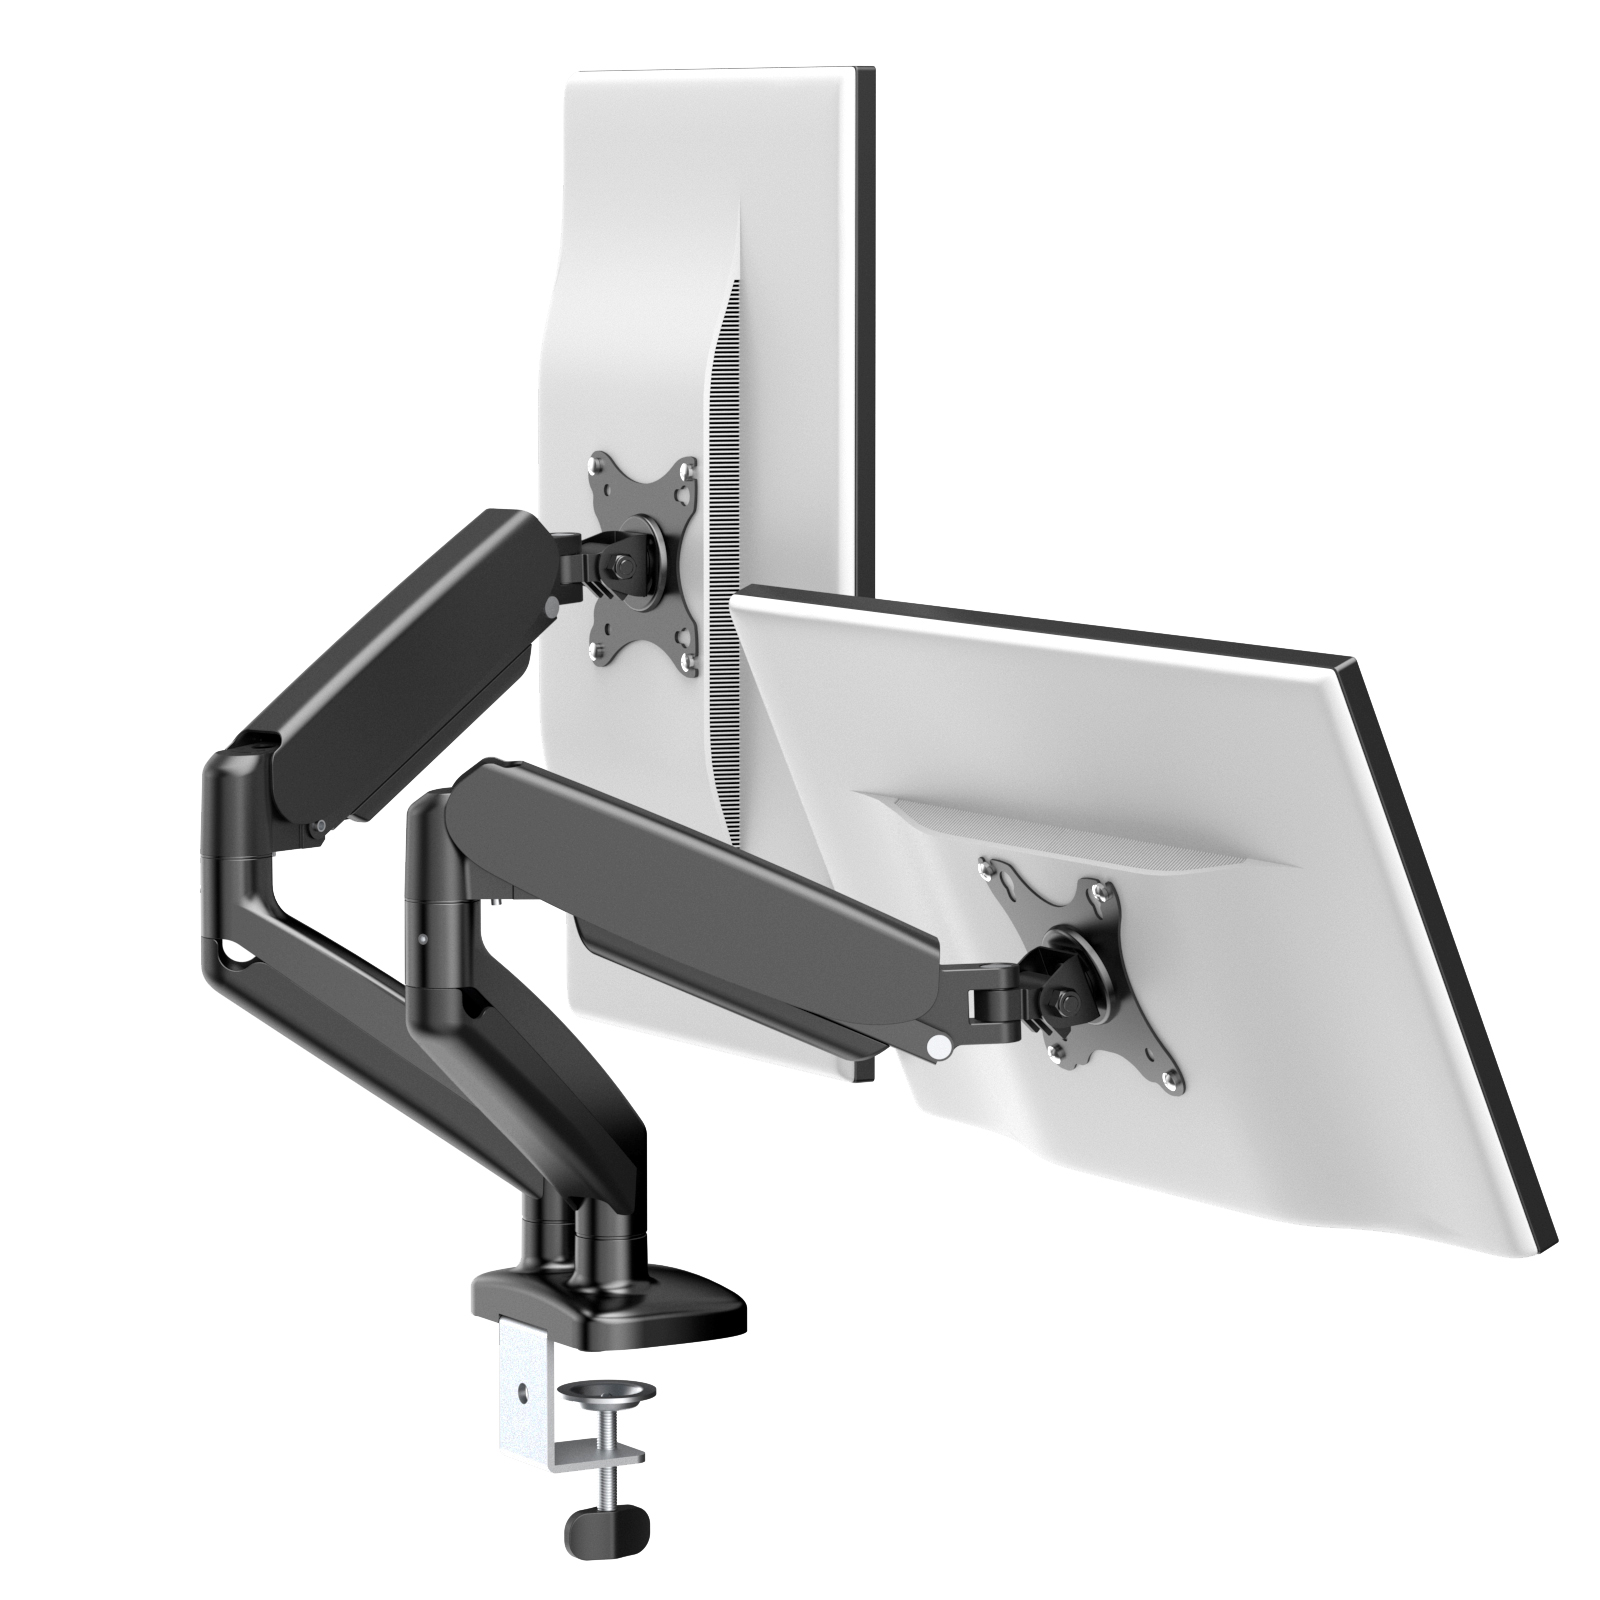 PC Monitor Arm -Double